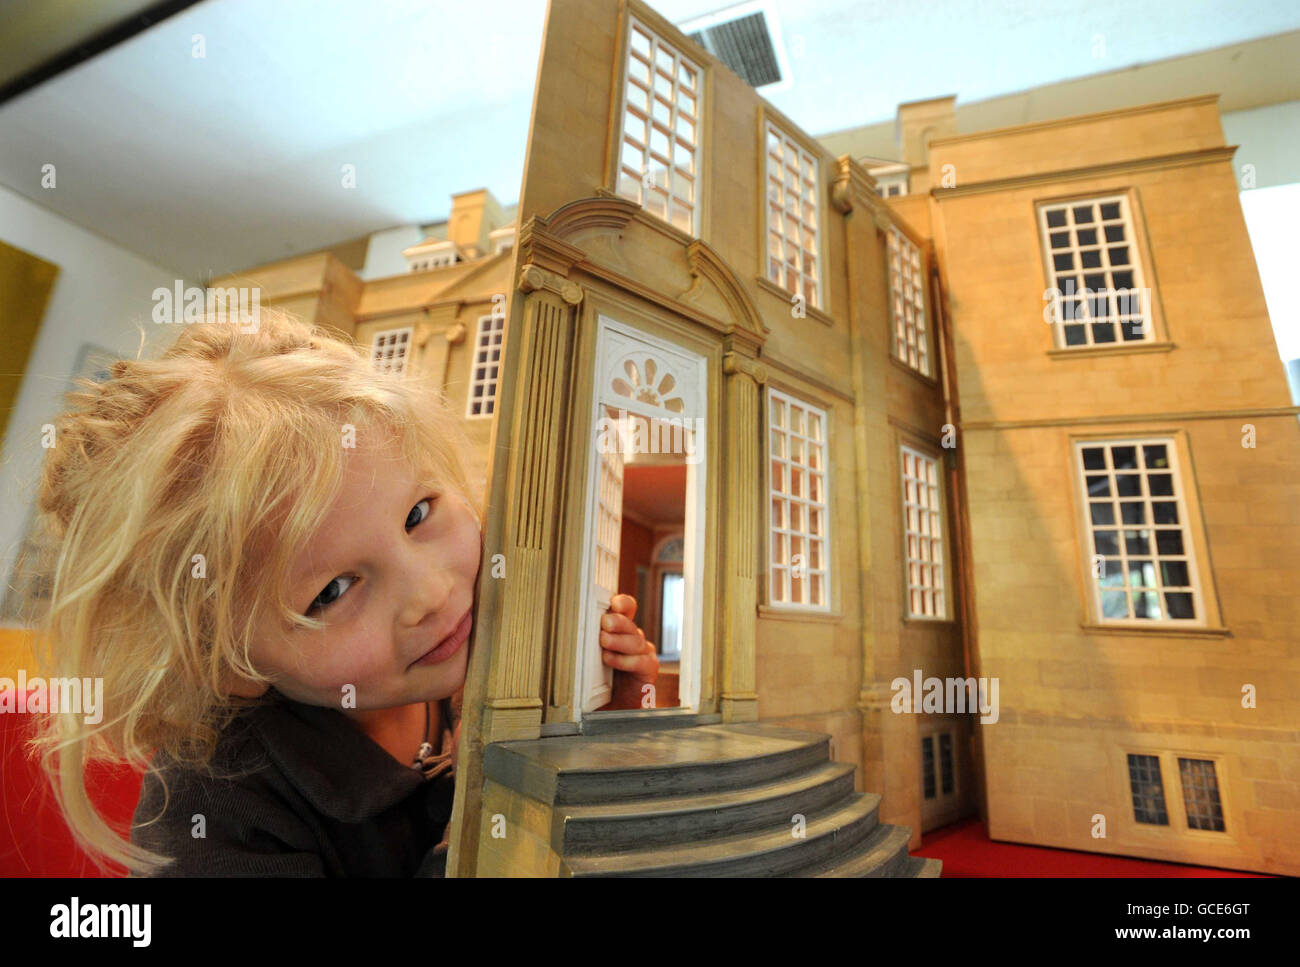 Emilia Hampton, who celebrated her 6th birthday today, with a 1:12th scale doll's house, modelled on Bourton House. The 24-room doll's house, which replicates the lavish interior of the celebrated country manor, is expected to fetch up to 3,000 at auction. Stock Photo